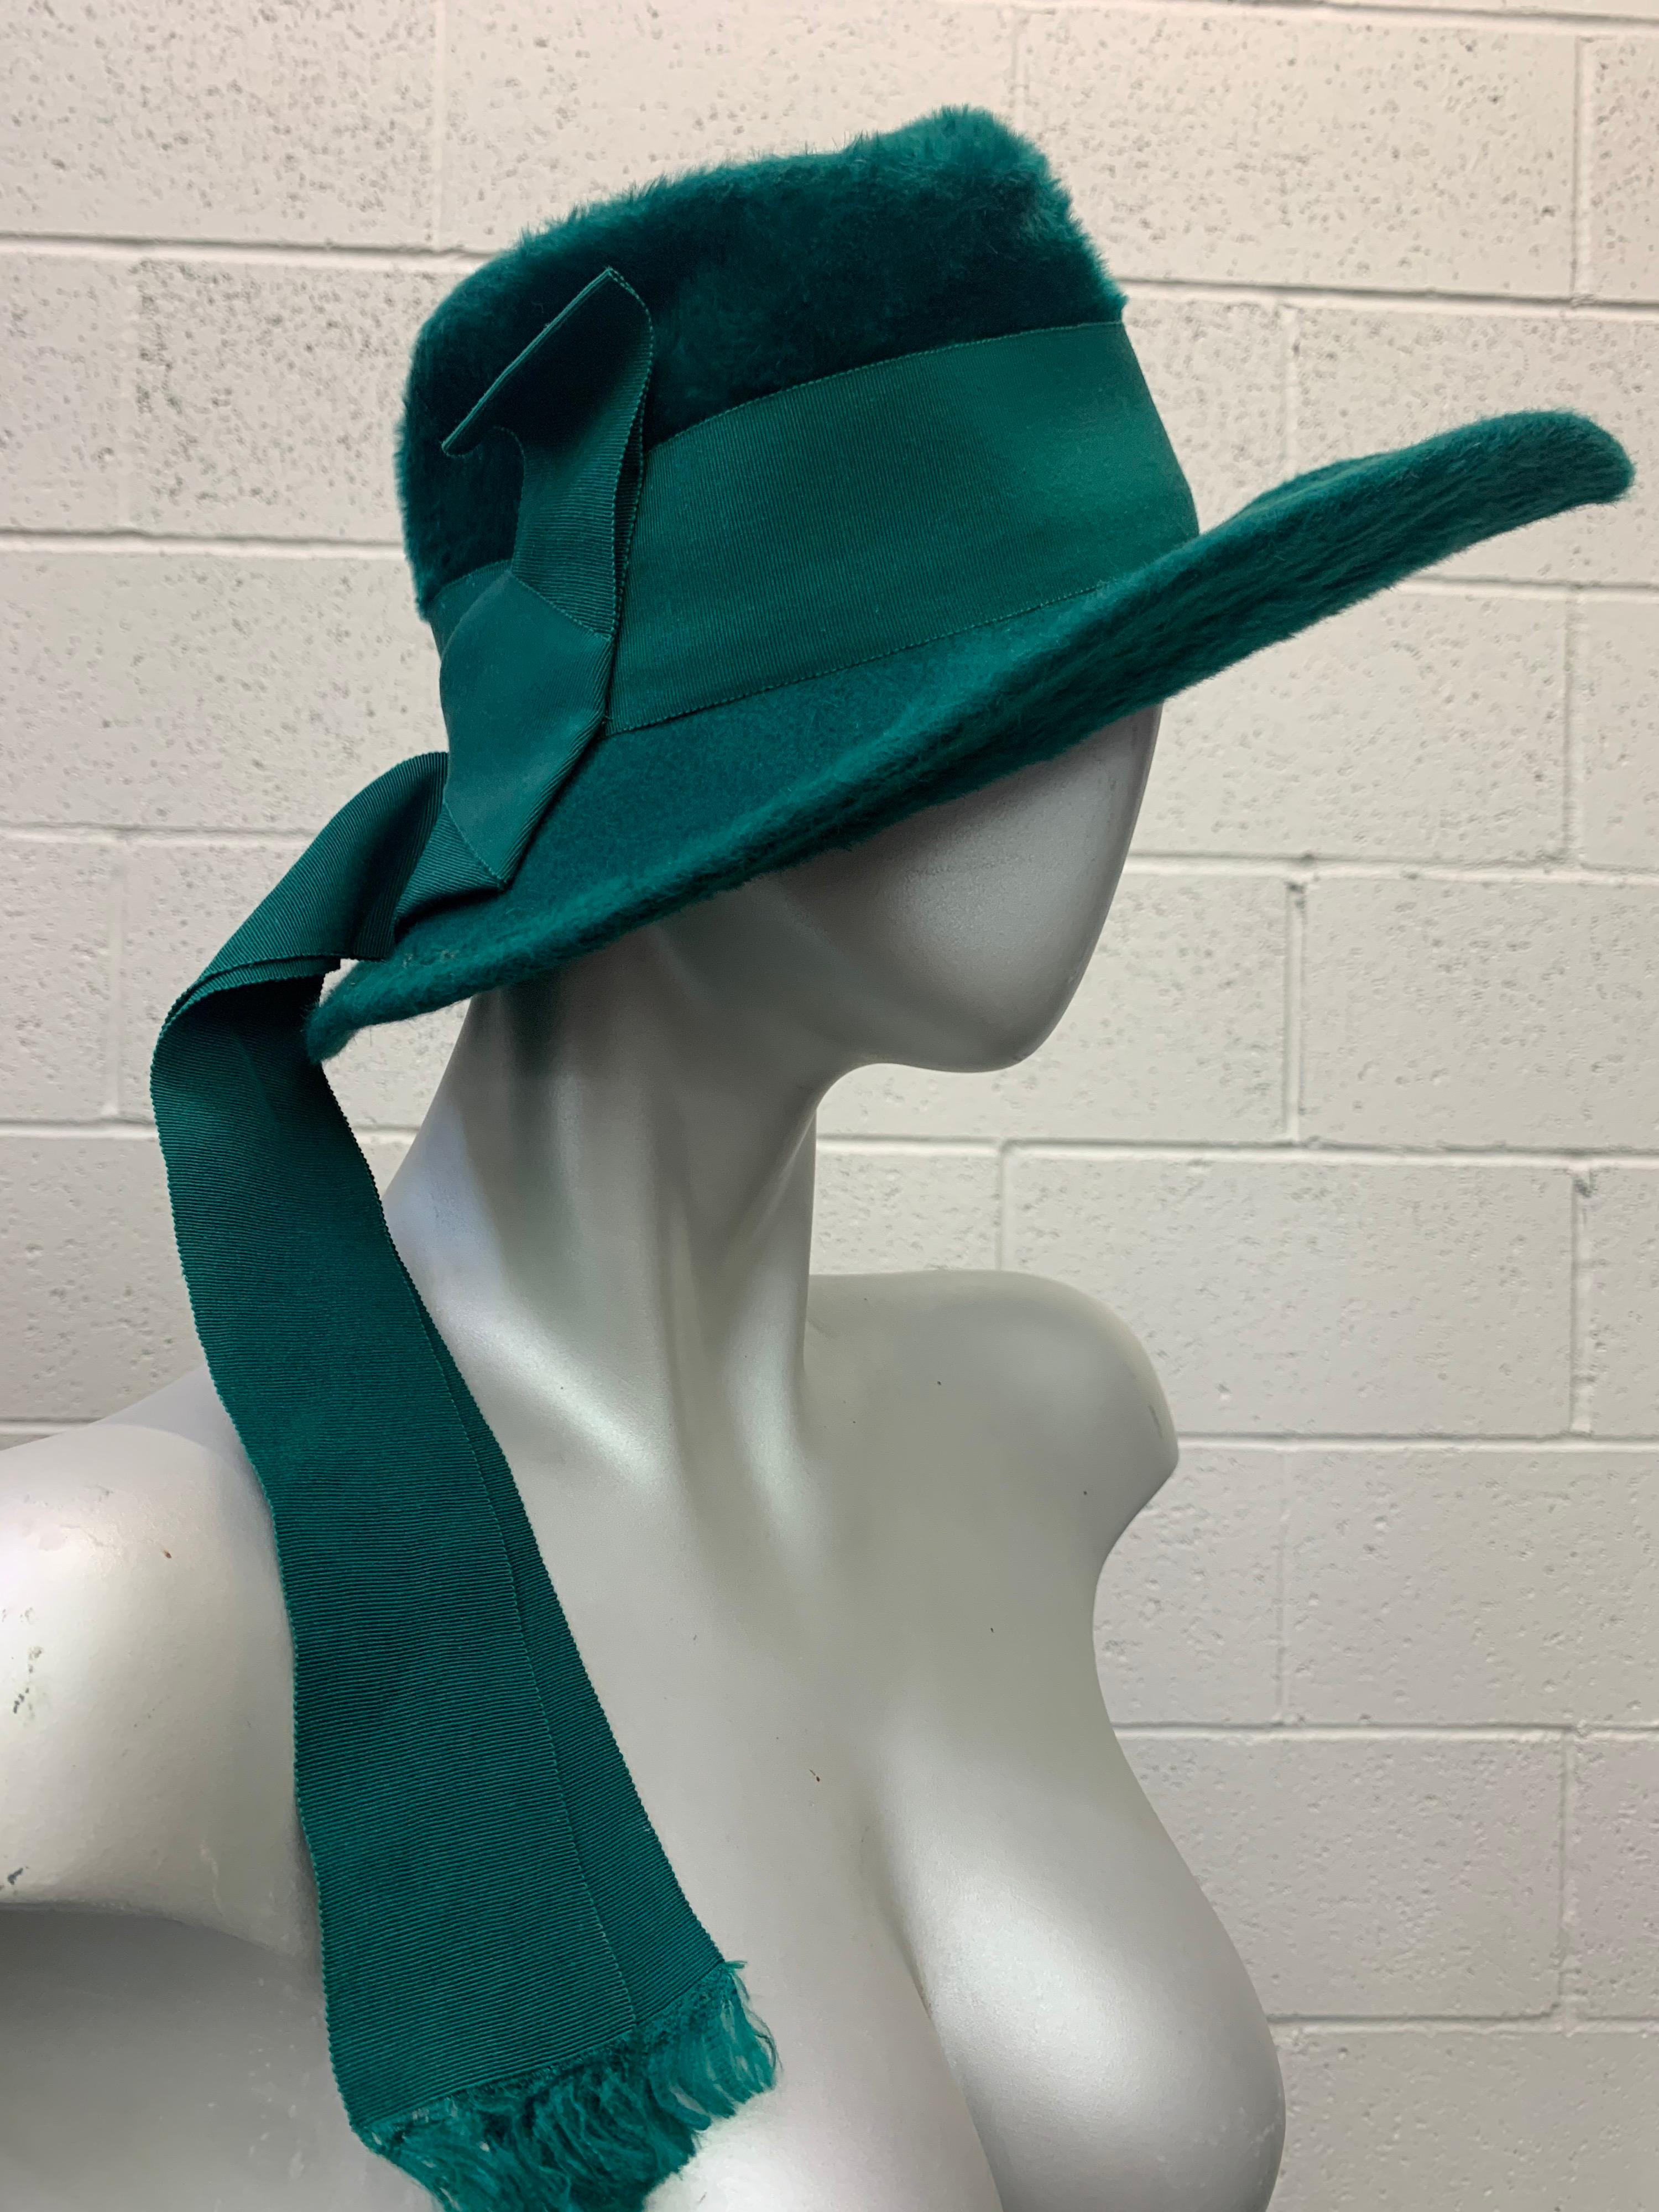 1970’s ultra chic Yves Saint Laurent fur felt Fedora style hat in deep emerald green features a wide coordinating grosgrain ribbon band and ribbon streamers that trail to the back adding flair to this rare beauty .

Hat measures 22 inches and is in